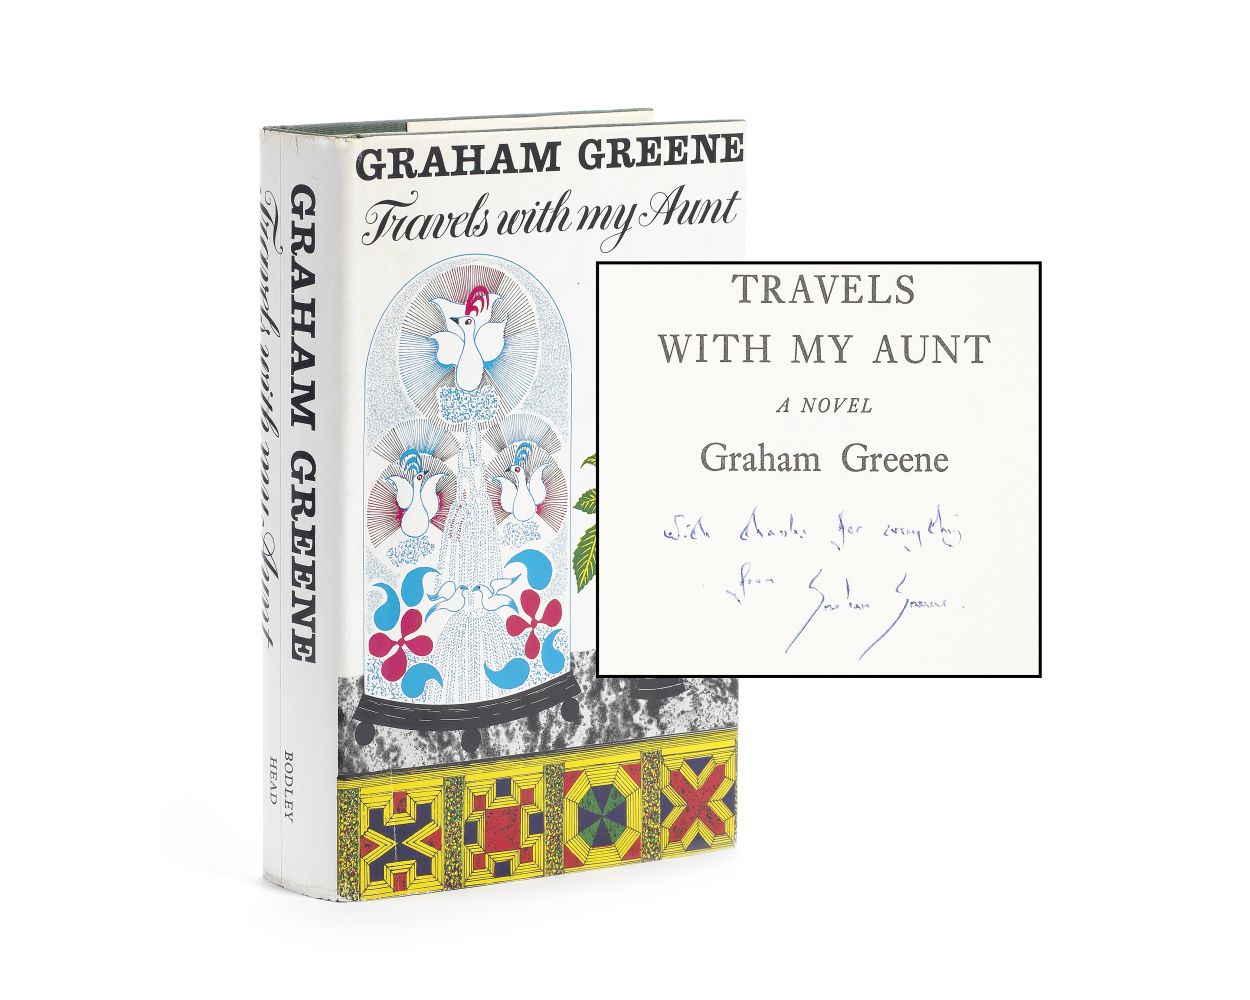 GREENE (GRAHAM) Travels With My Aunt, FIRST EDITION, AUTHOR'S PRESENTATION COPY, inscribed 'with ...